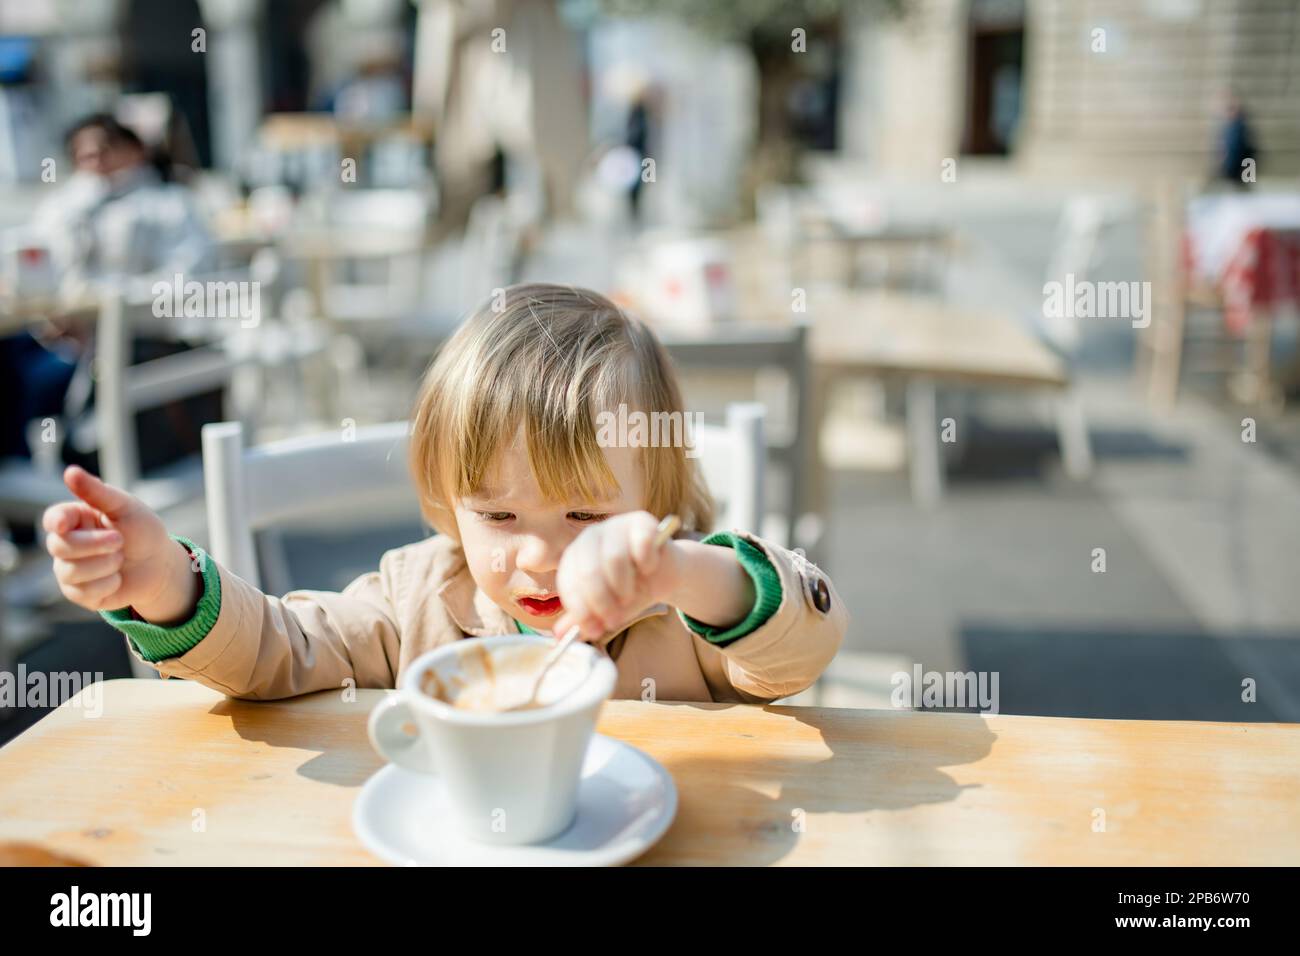 https://c8.alamy.com/comp/2PB6W70/cute-toddler-boy-having-hot-chocolate-in-outdoor-cafe-small-child-drinking-hot-beverage-on-sunny-terrace-in-lecco-spending-good-time-on-vacation-wit-2PB6W70.jpg